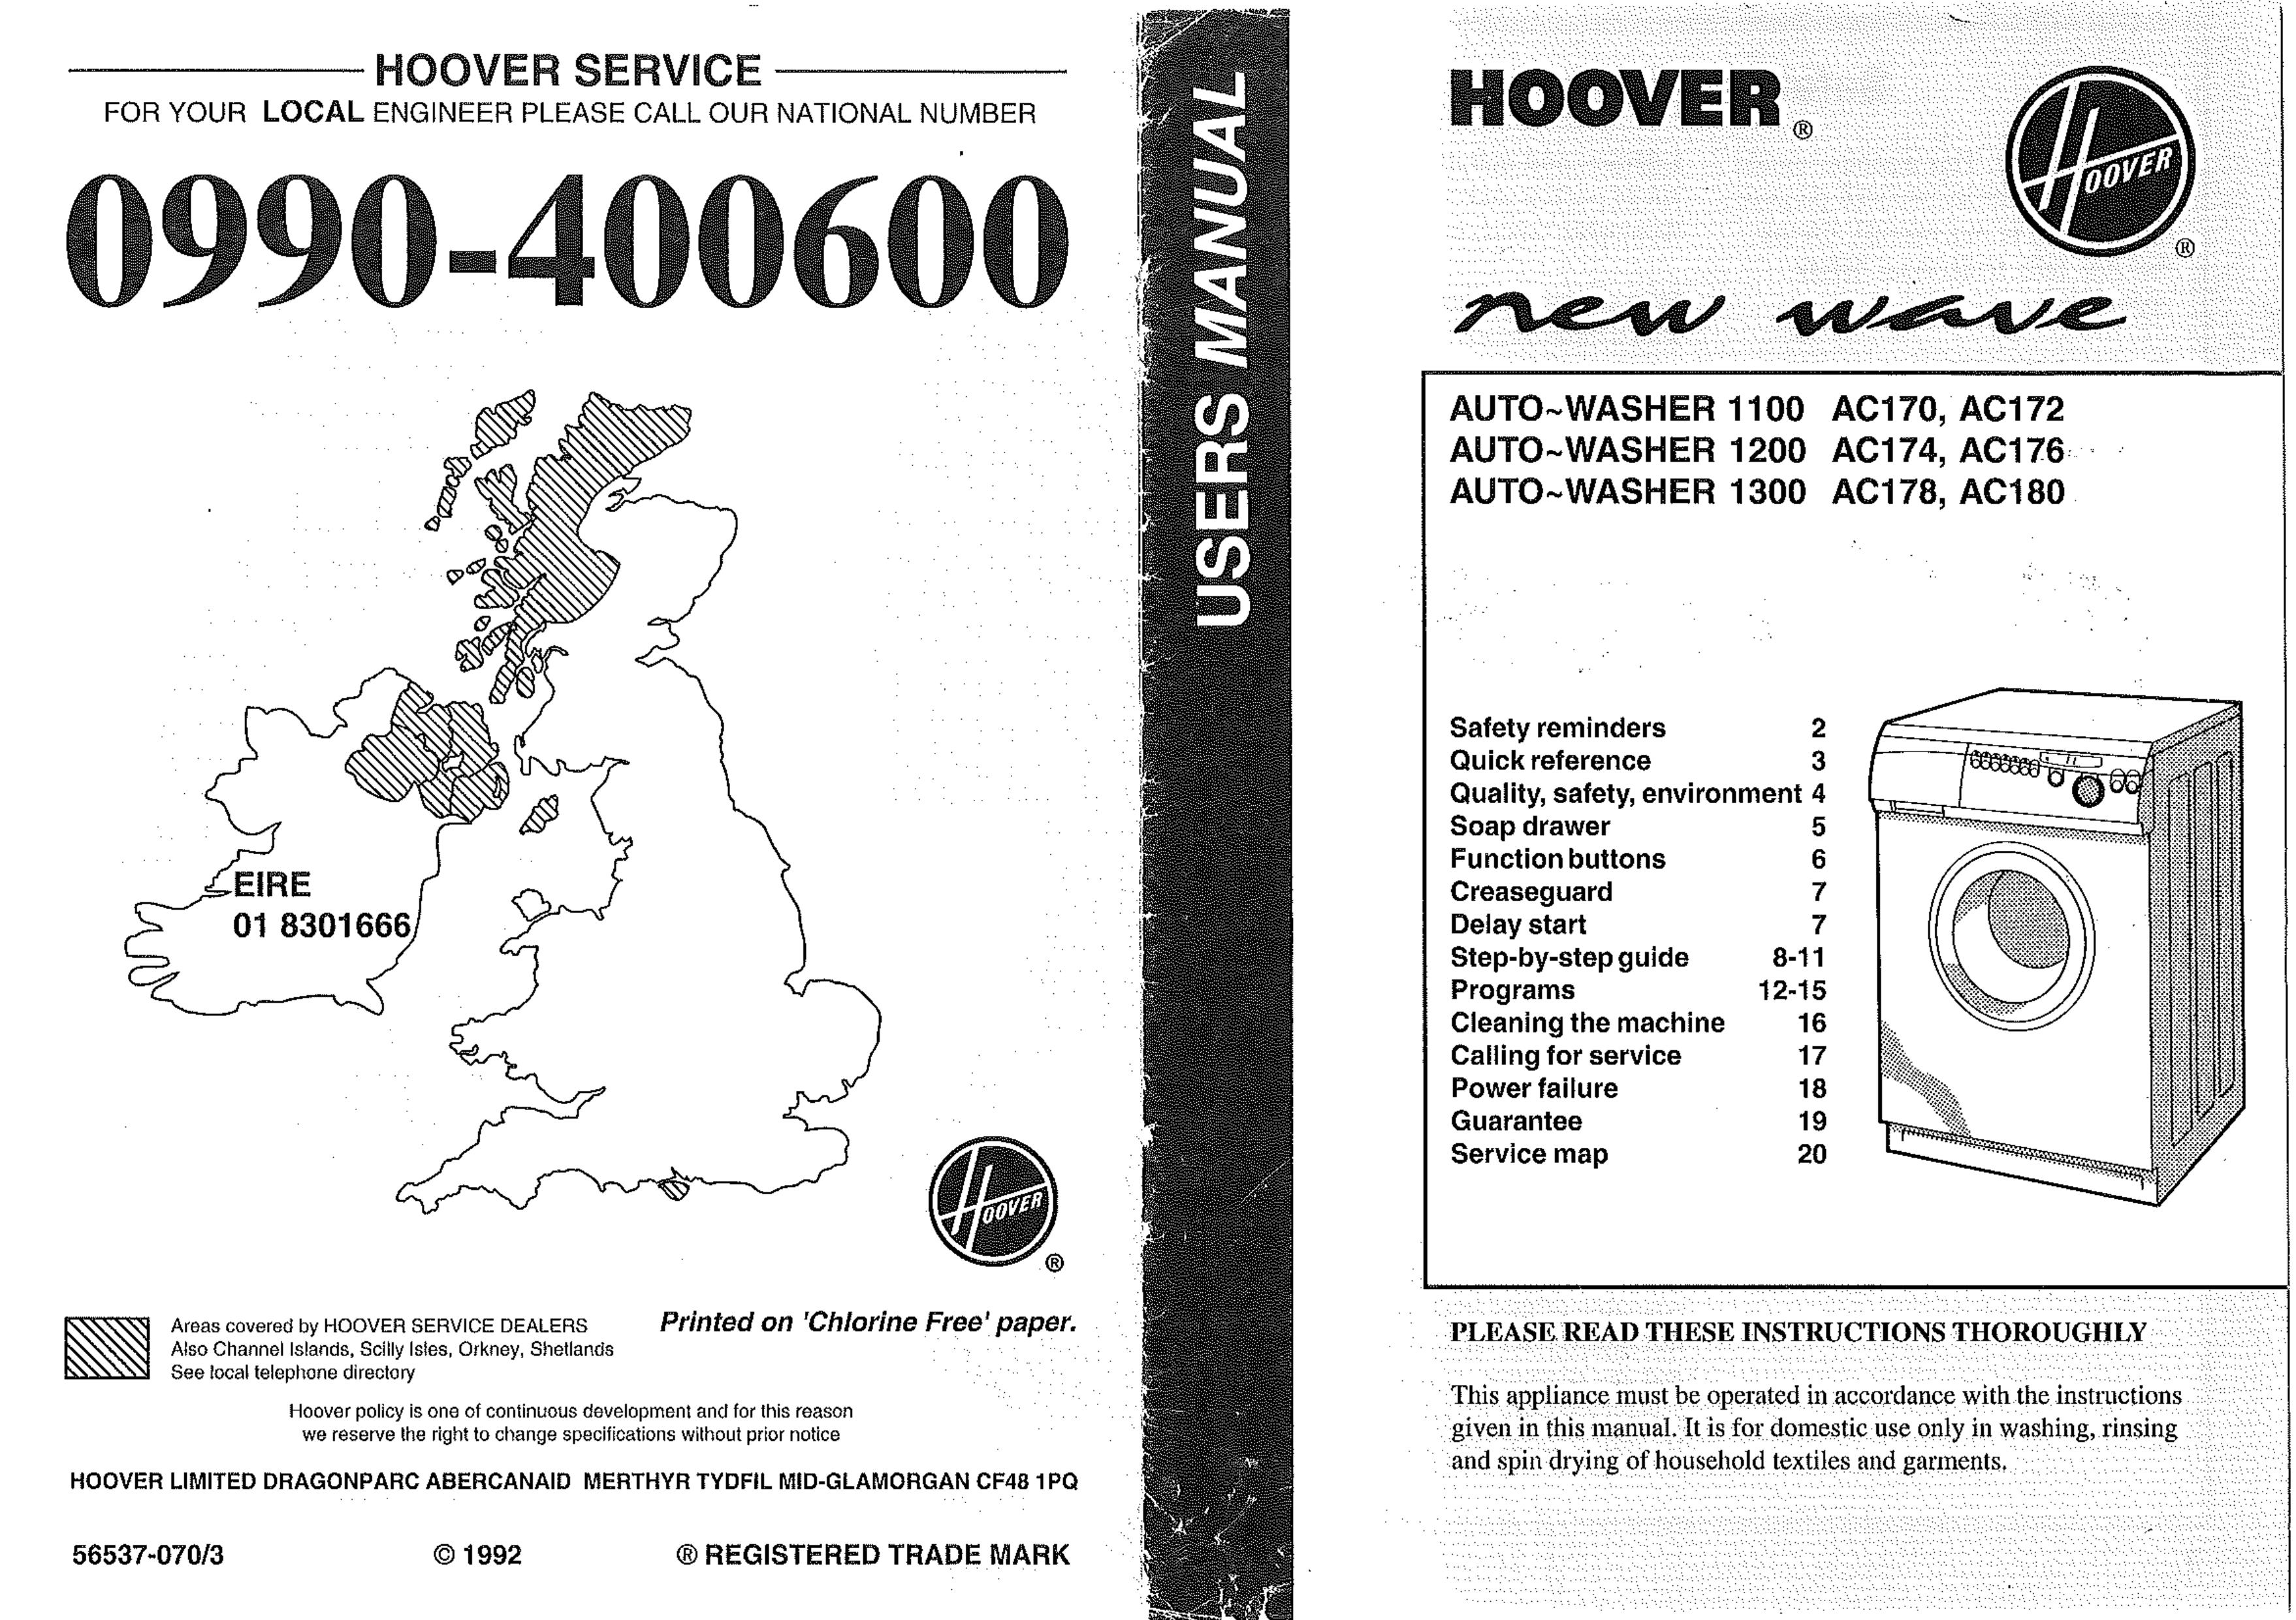 Hoover 1300 AC180 Washer User Manual